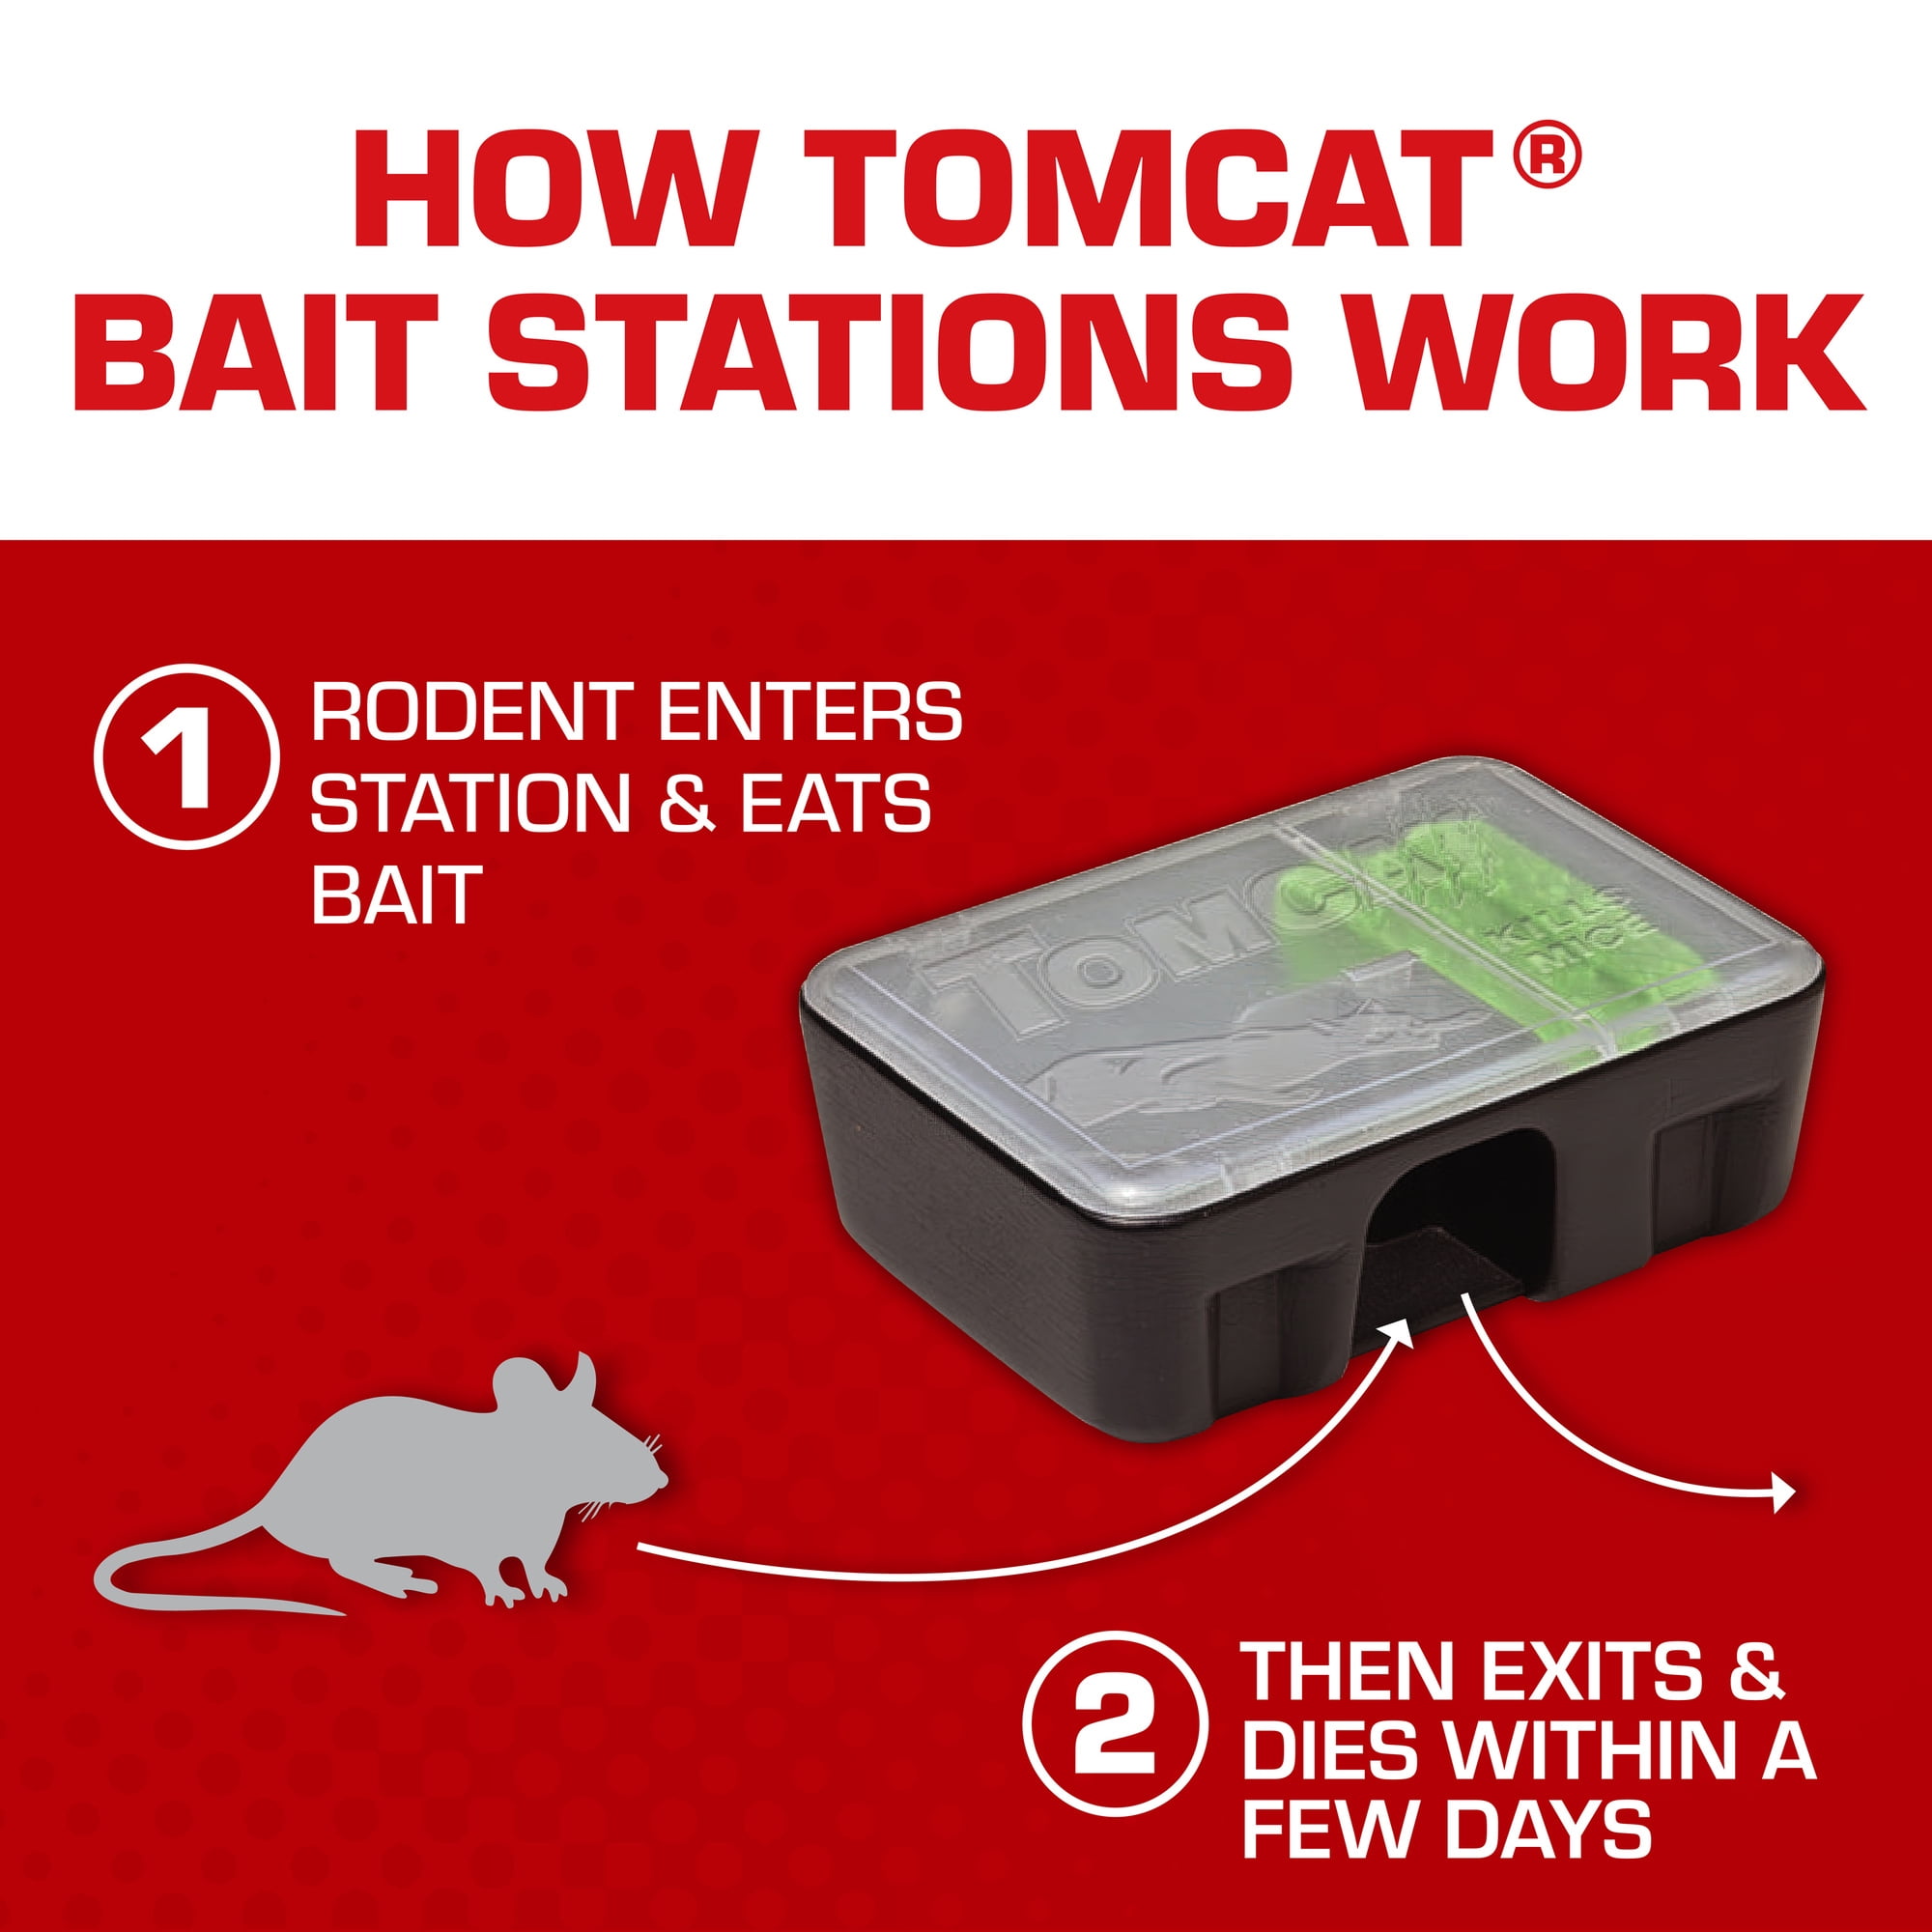 Tomcat Rat and Mouse Killer Disposable Stations for Indoor/Outdoor Use:  Child and Dog Resistant, Pre-Filled, Easy Monitoring, 2-Pack